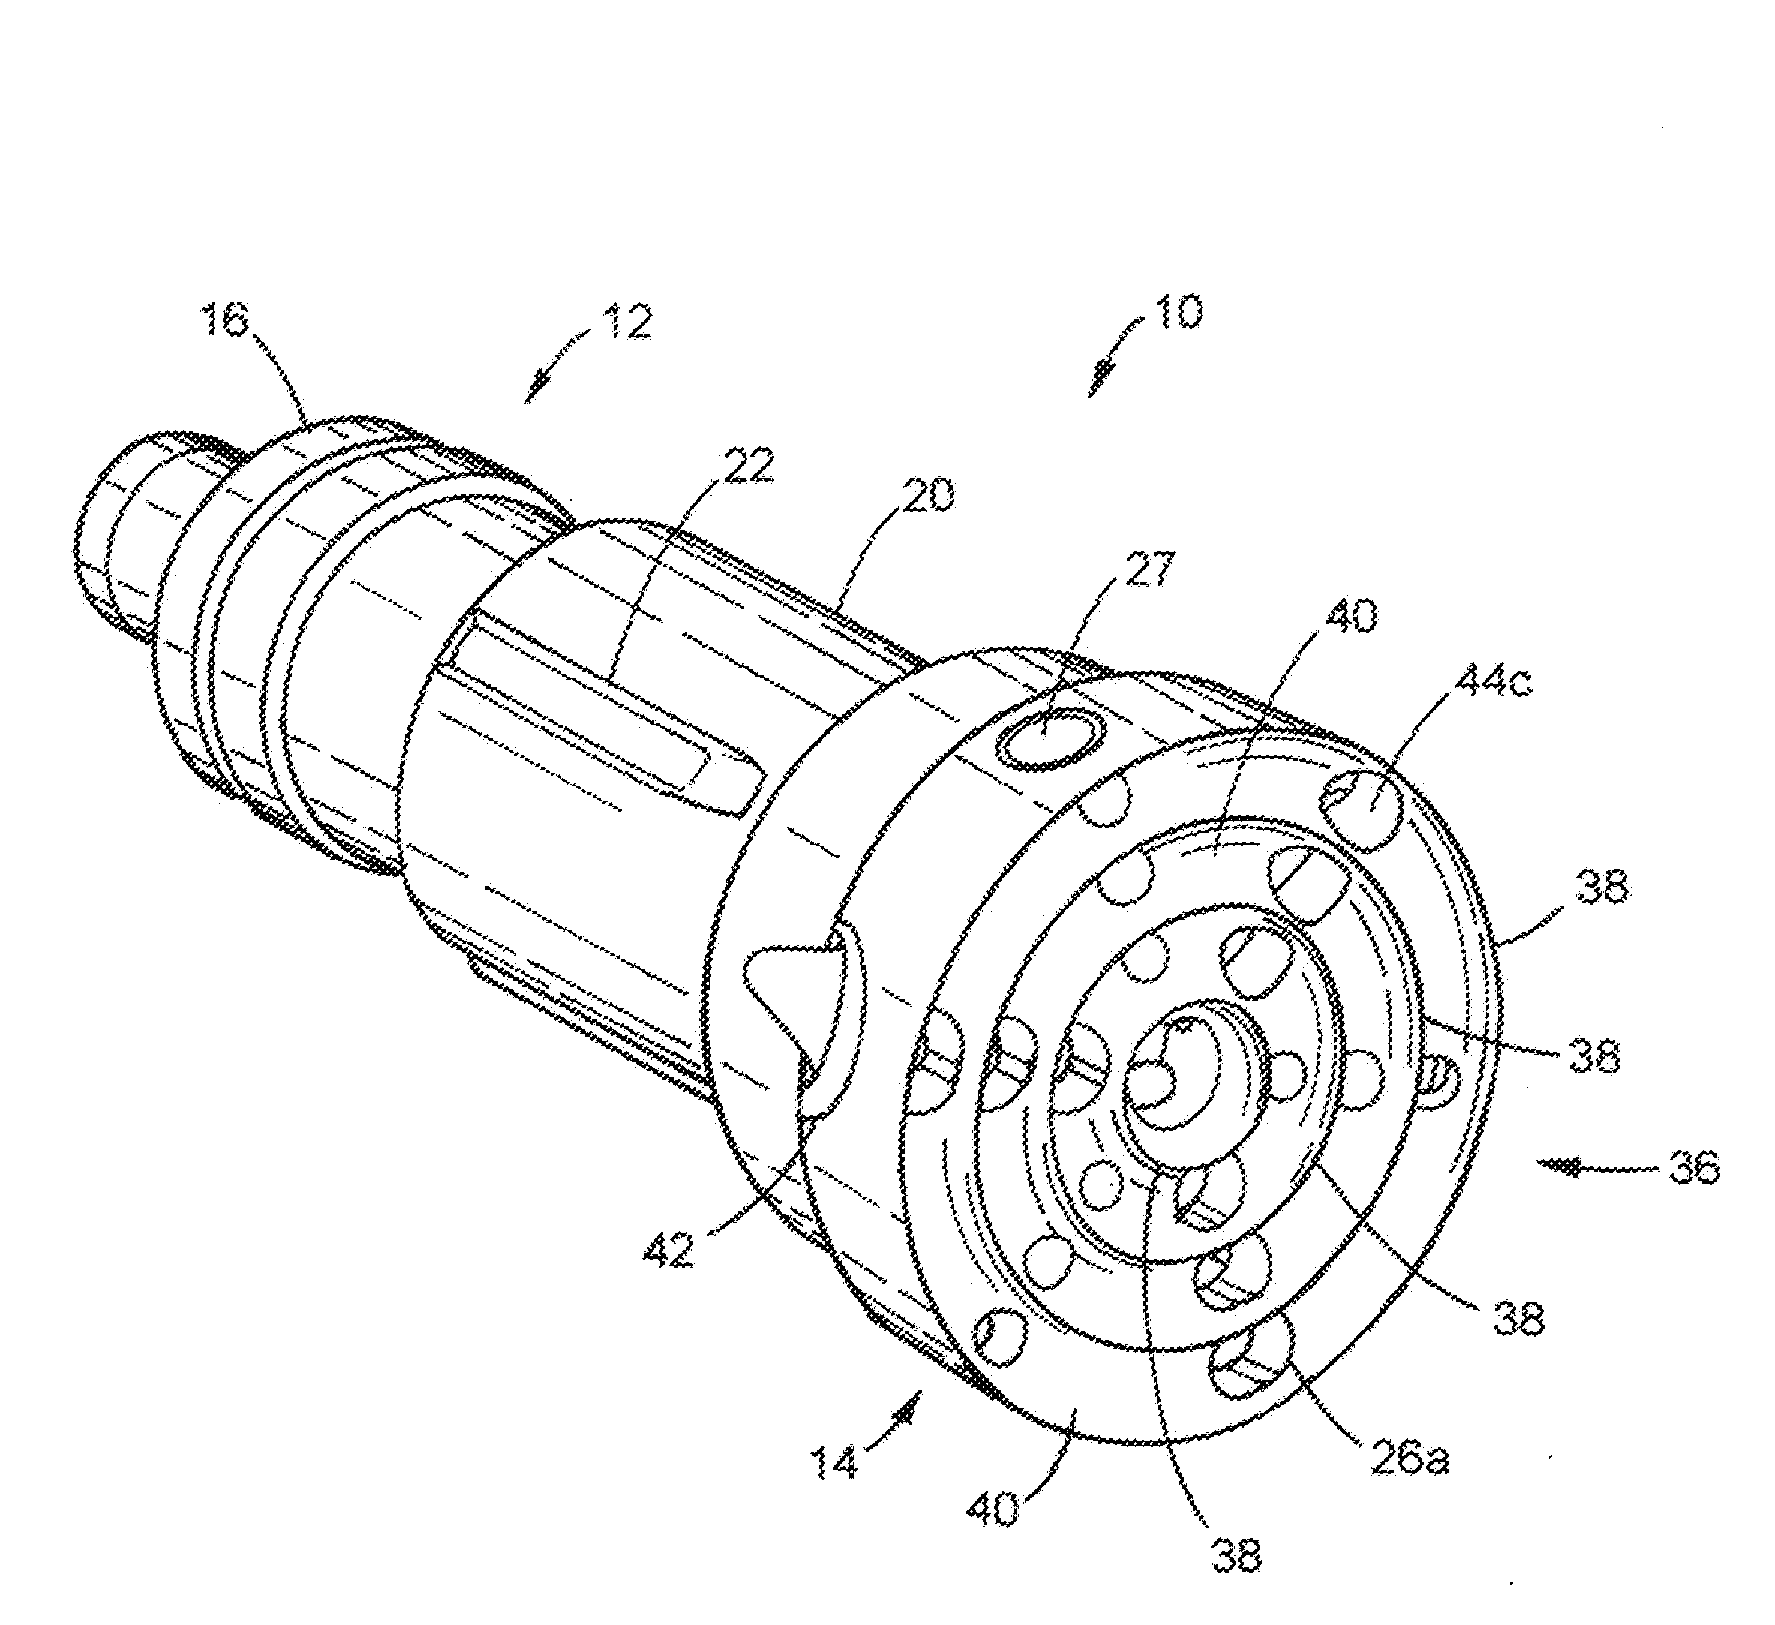 Non-rotating drill bit for a down-the-hole drill hammer